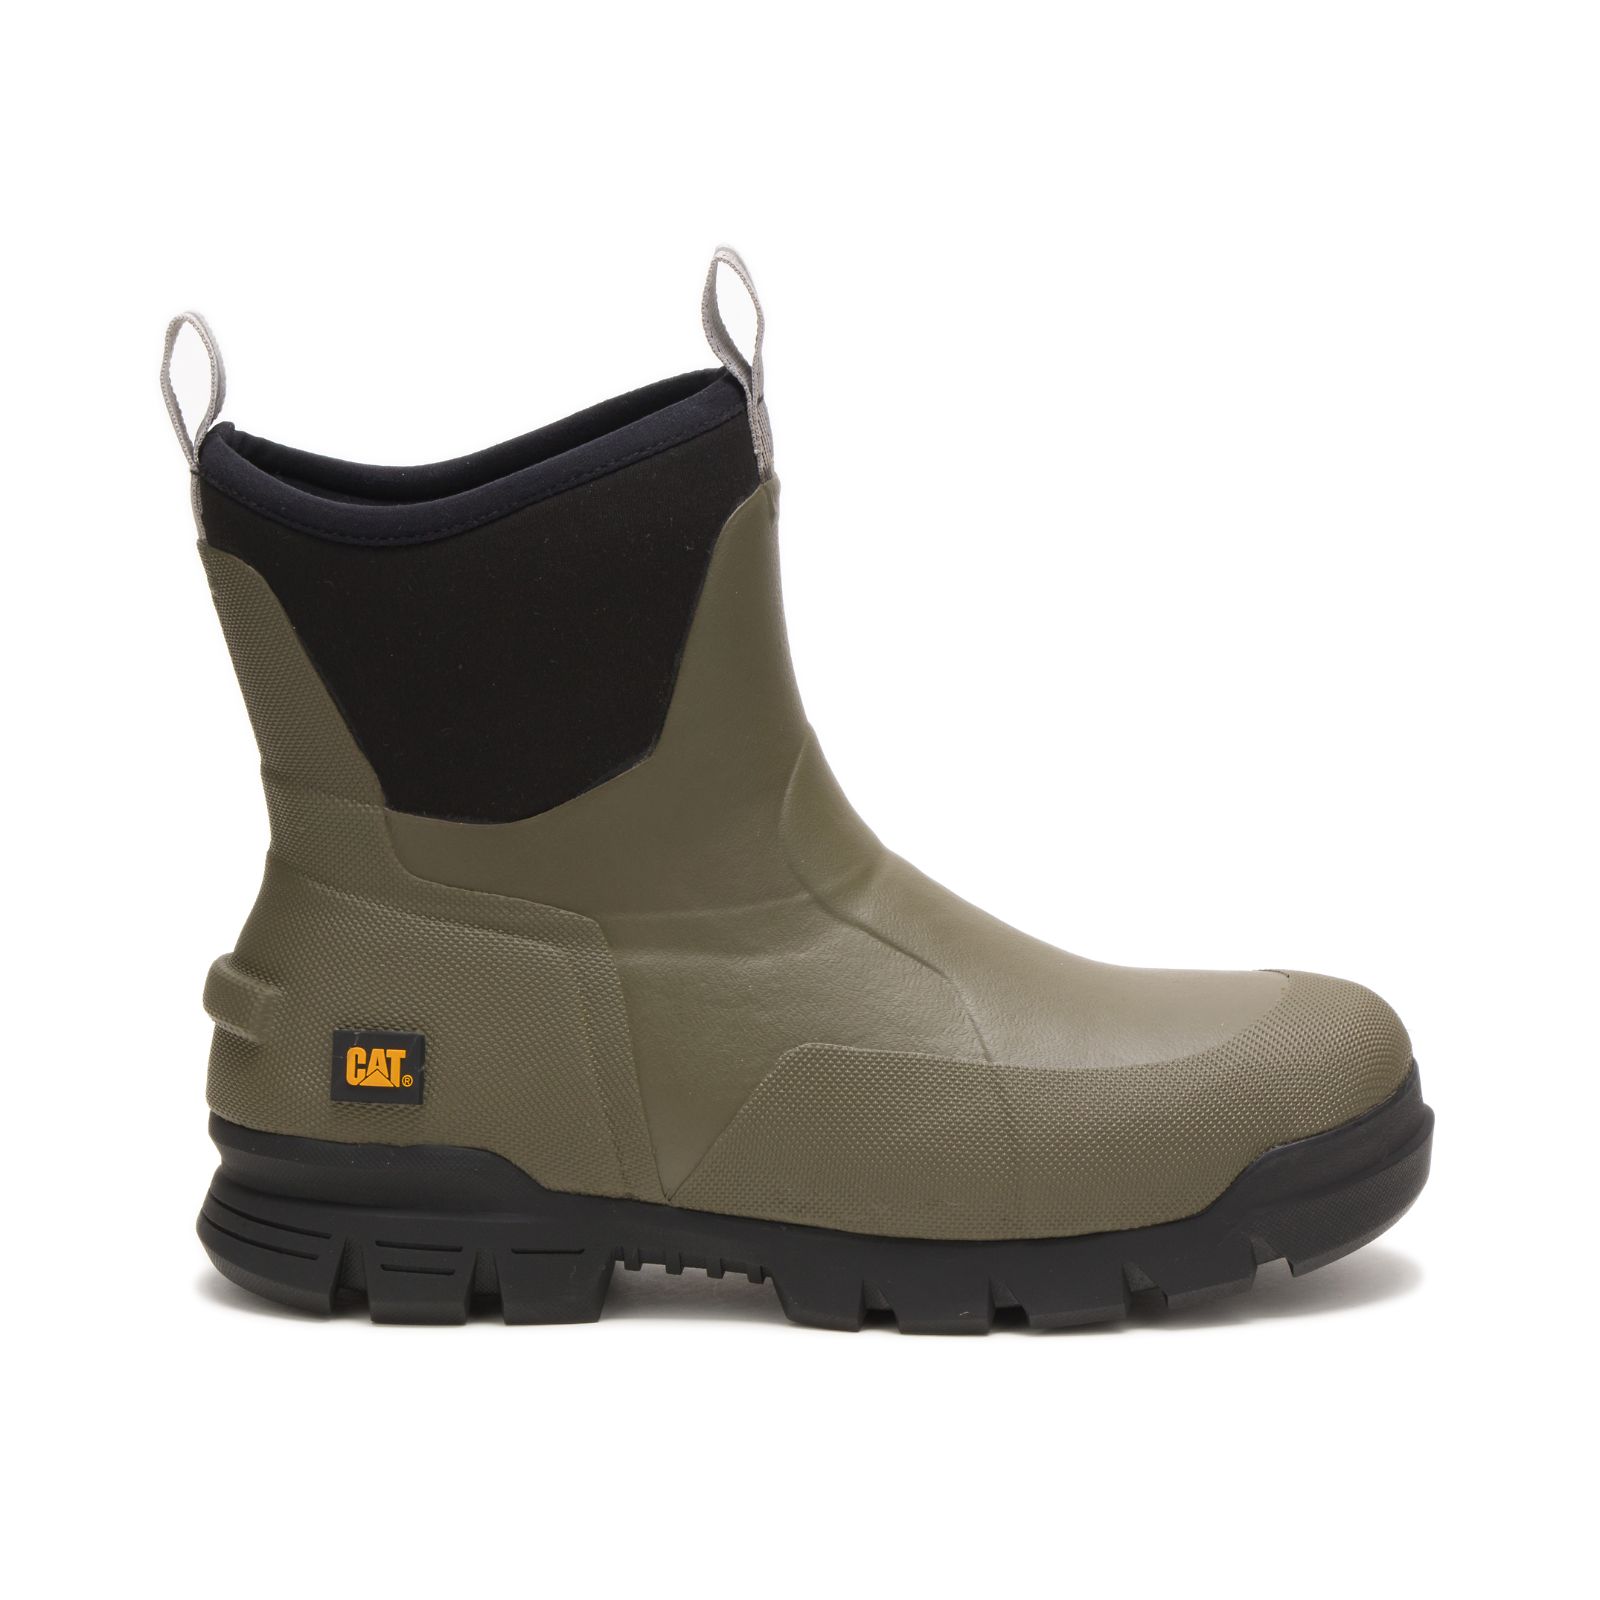 Caterpillar Stormers 6" Philippines - Womens Rubber Boots - Olive 23815OCNM